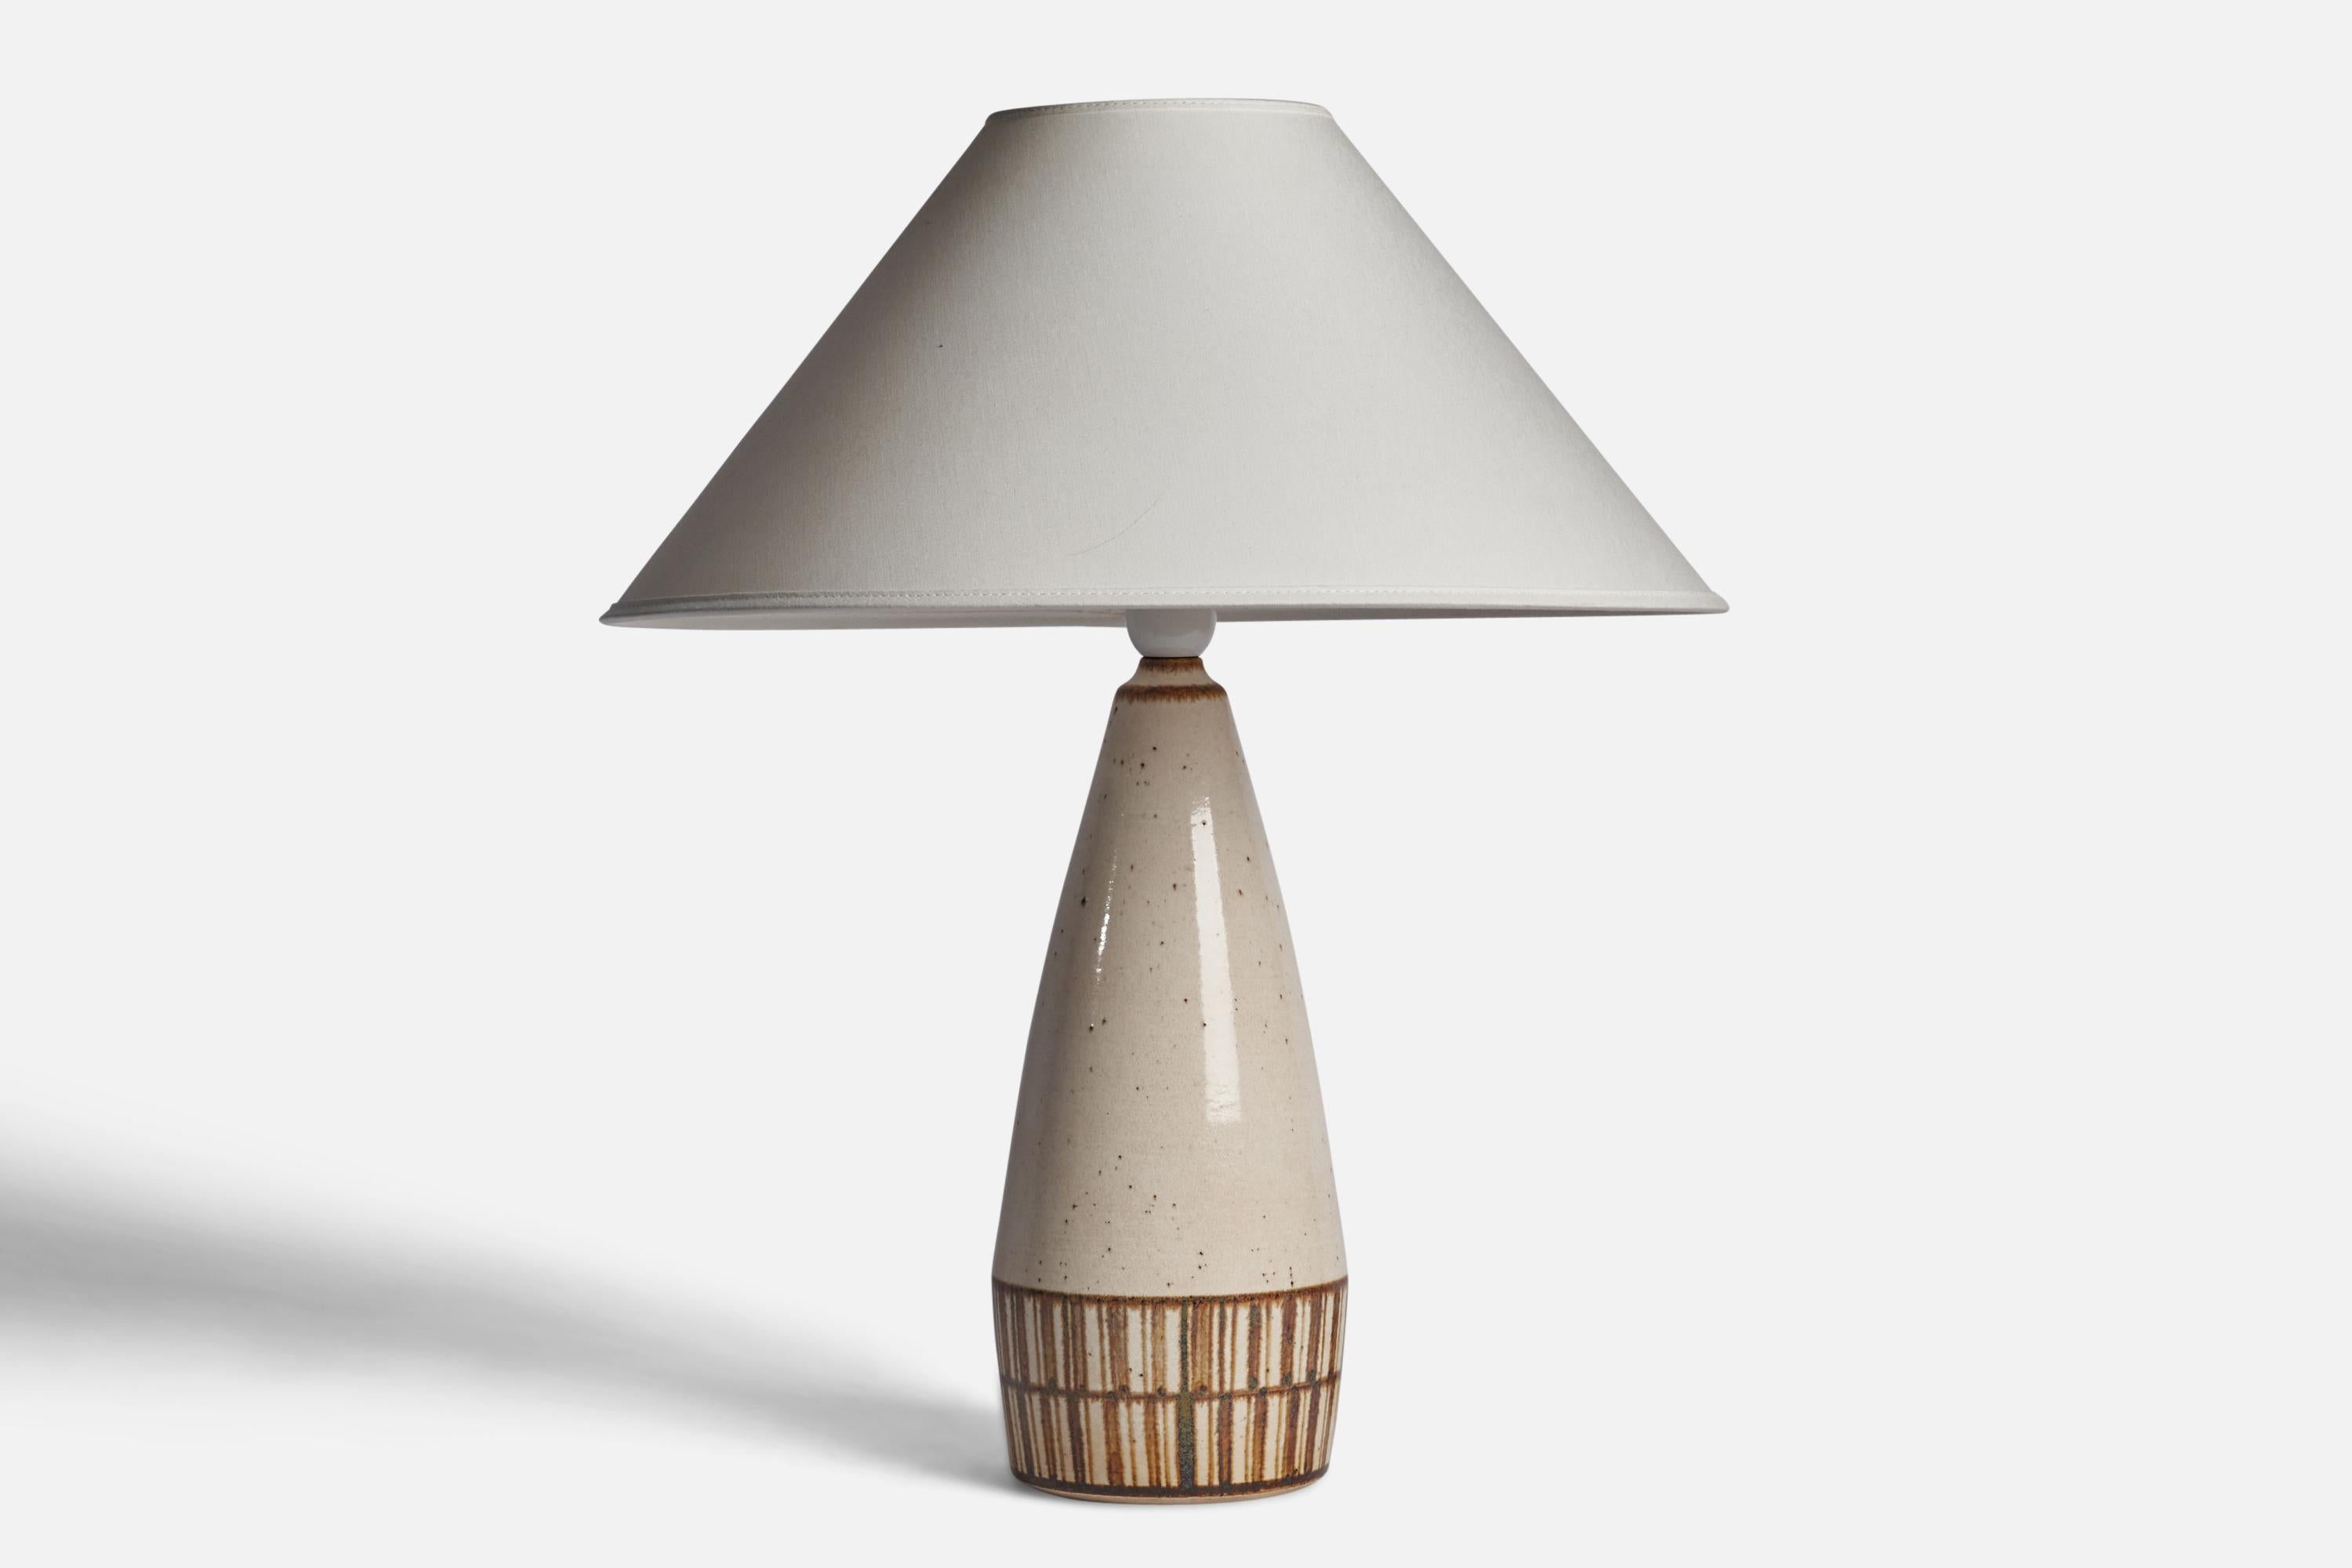 An off-white and brown-glazed stoneware table lamp designed and produced by  Michael Andersen, Bornholm, Denmark, c. 1960s.

Dimensions of Lamp (inches): 14.5 H x 5” Diameter
Dimensions of Shade (inches): 4.5” Top Diameter x 16” Bottom Diameter x